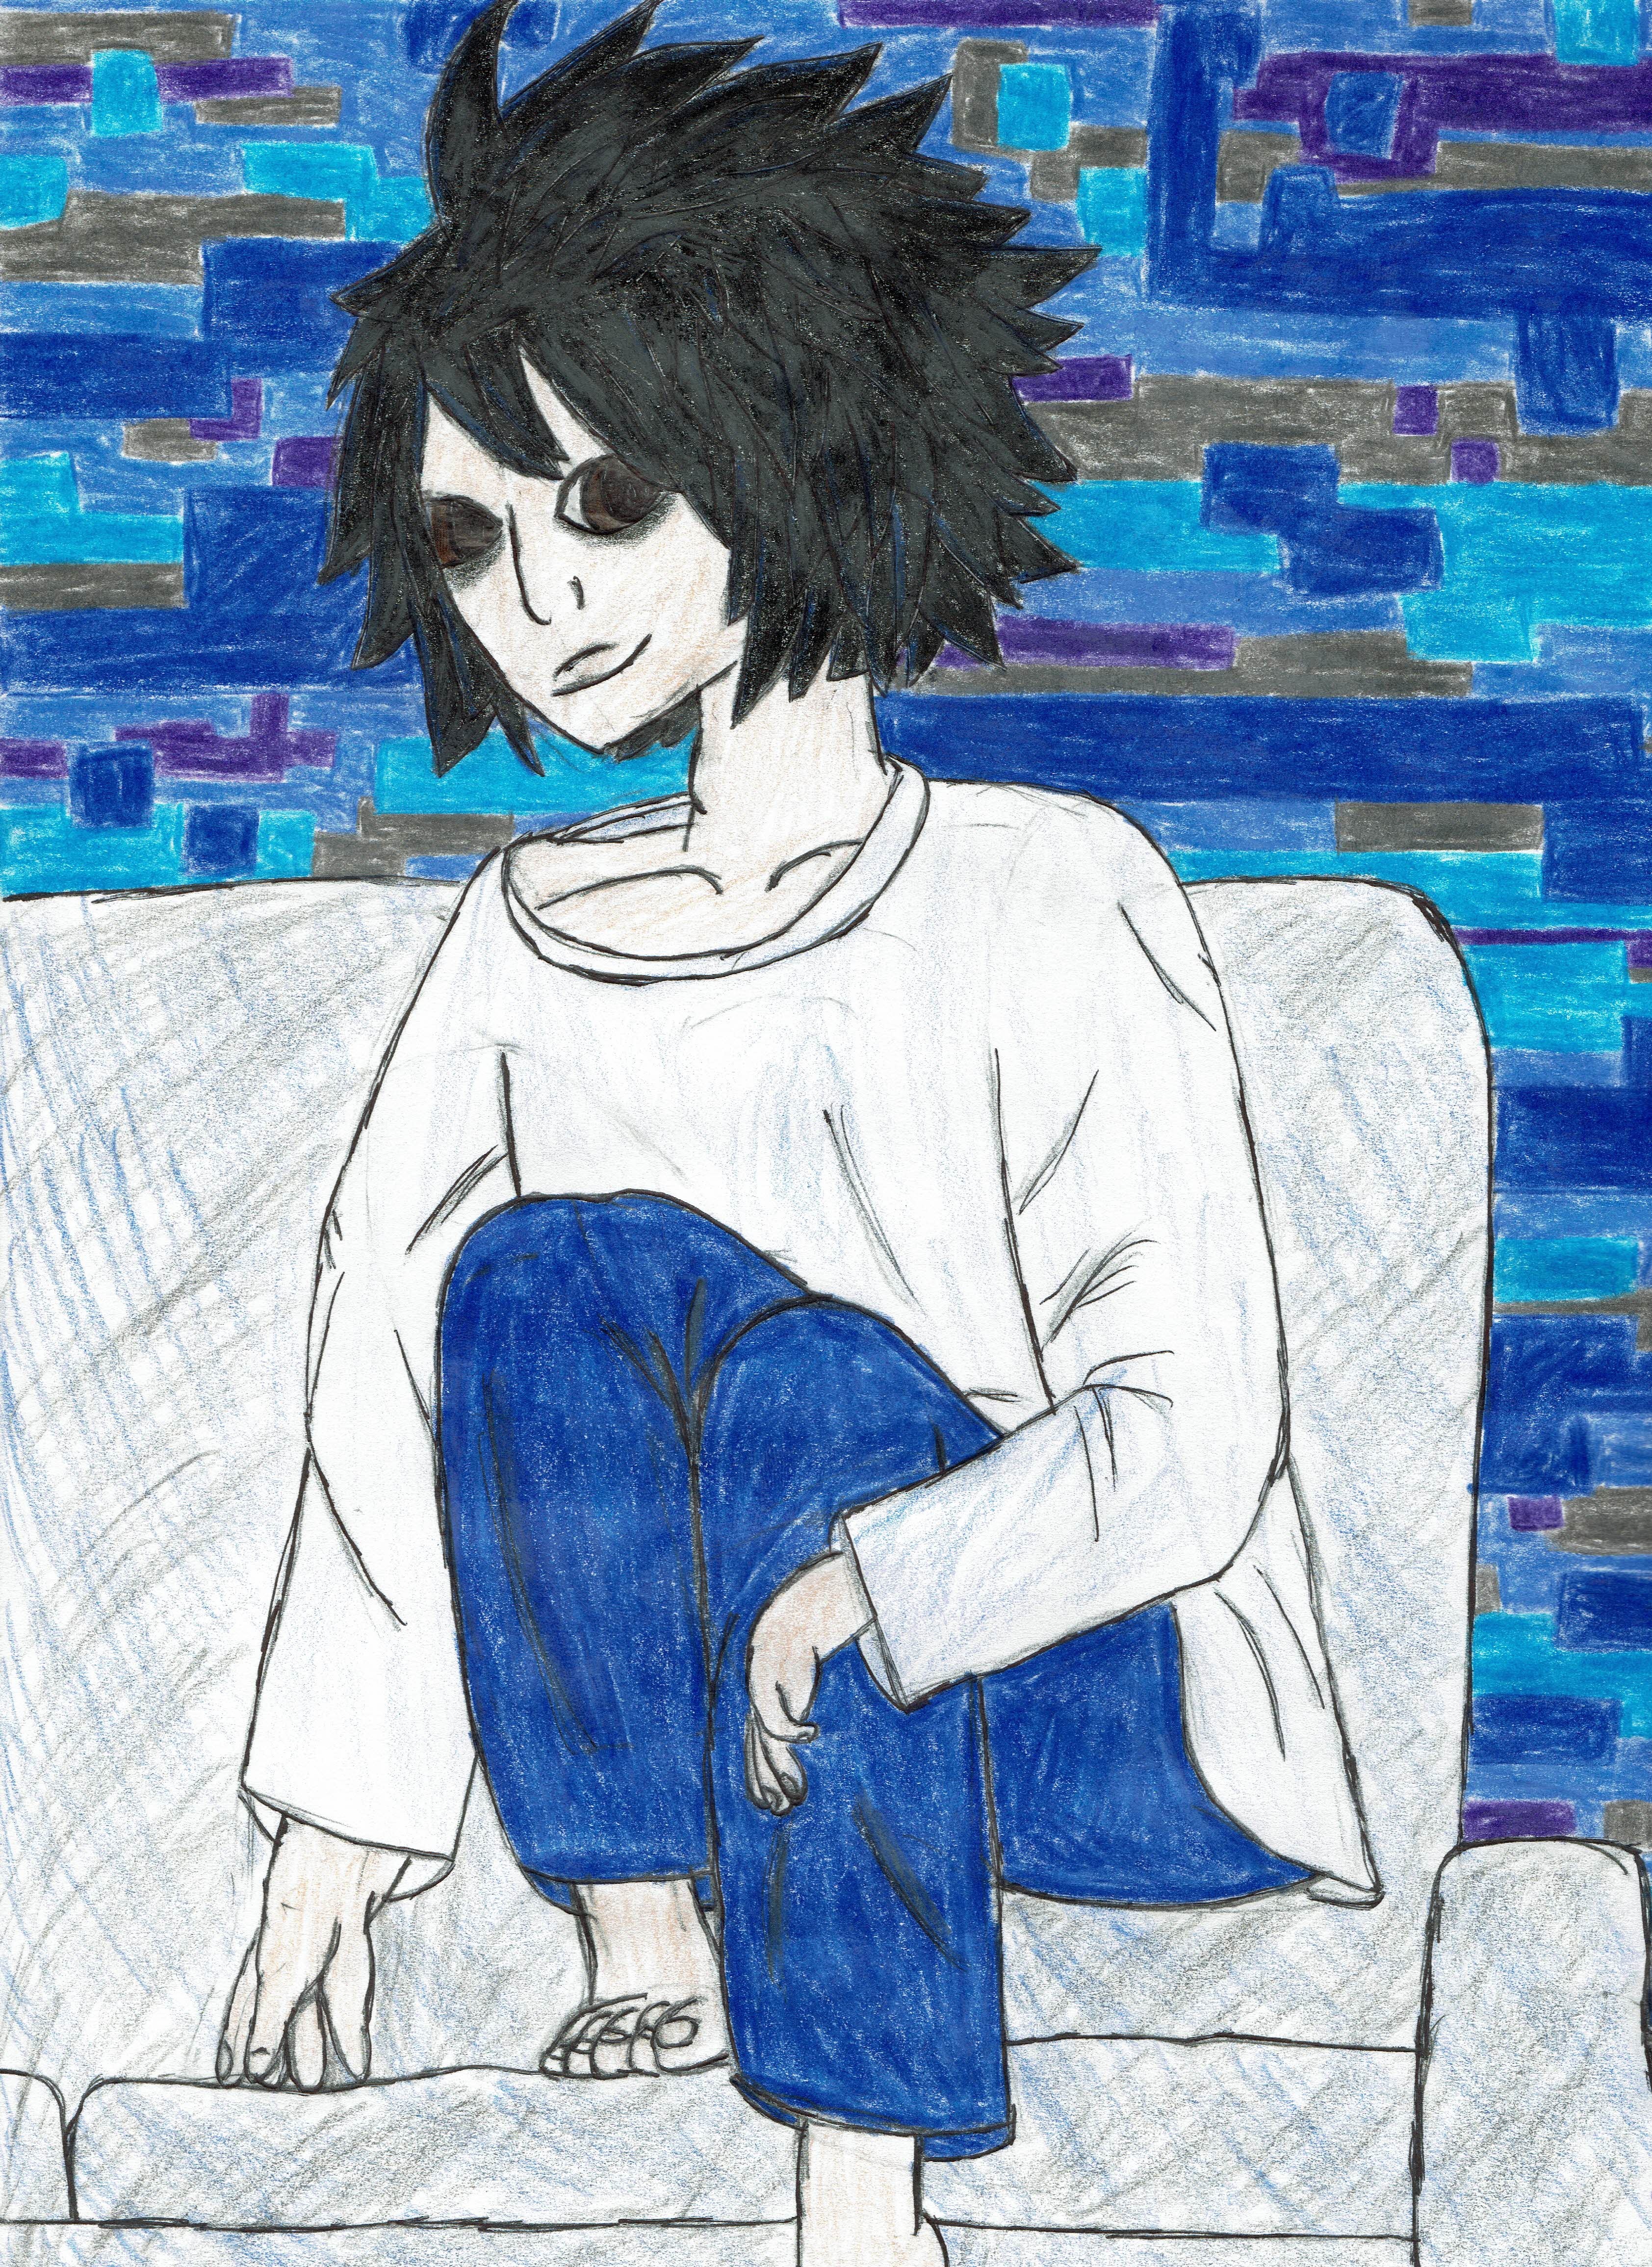 Colored pencil and pen fan art of L Lawliet from the anime Death Note. My first anime crush that led to years of pining over emo hotties of all genders